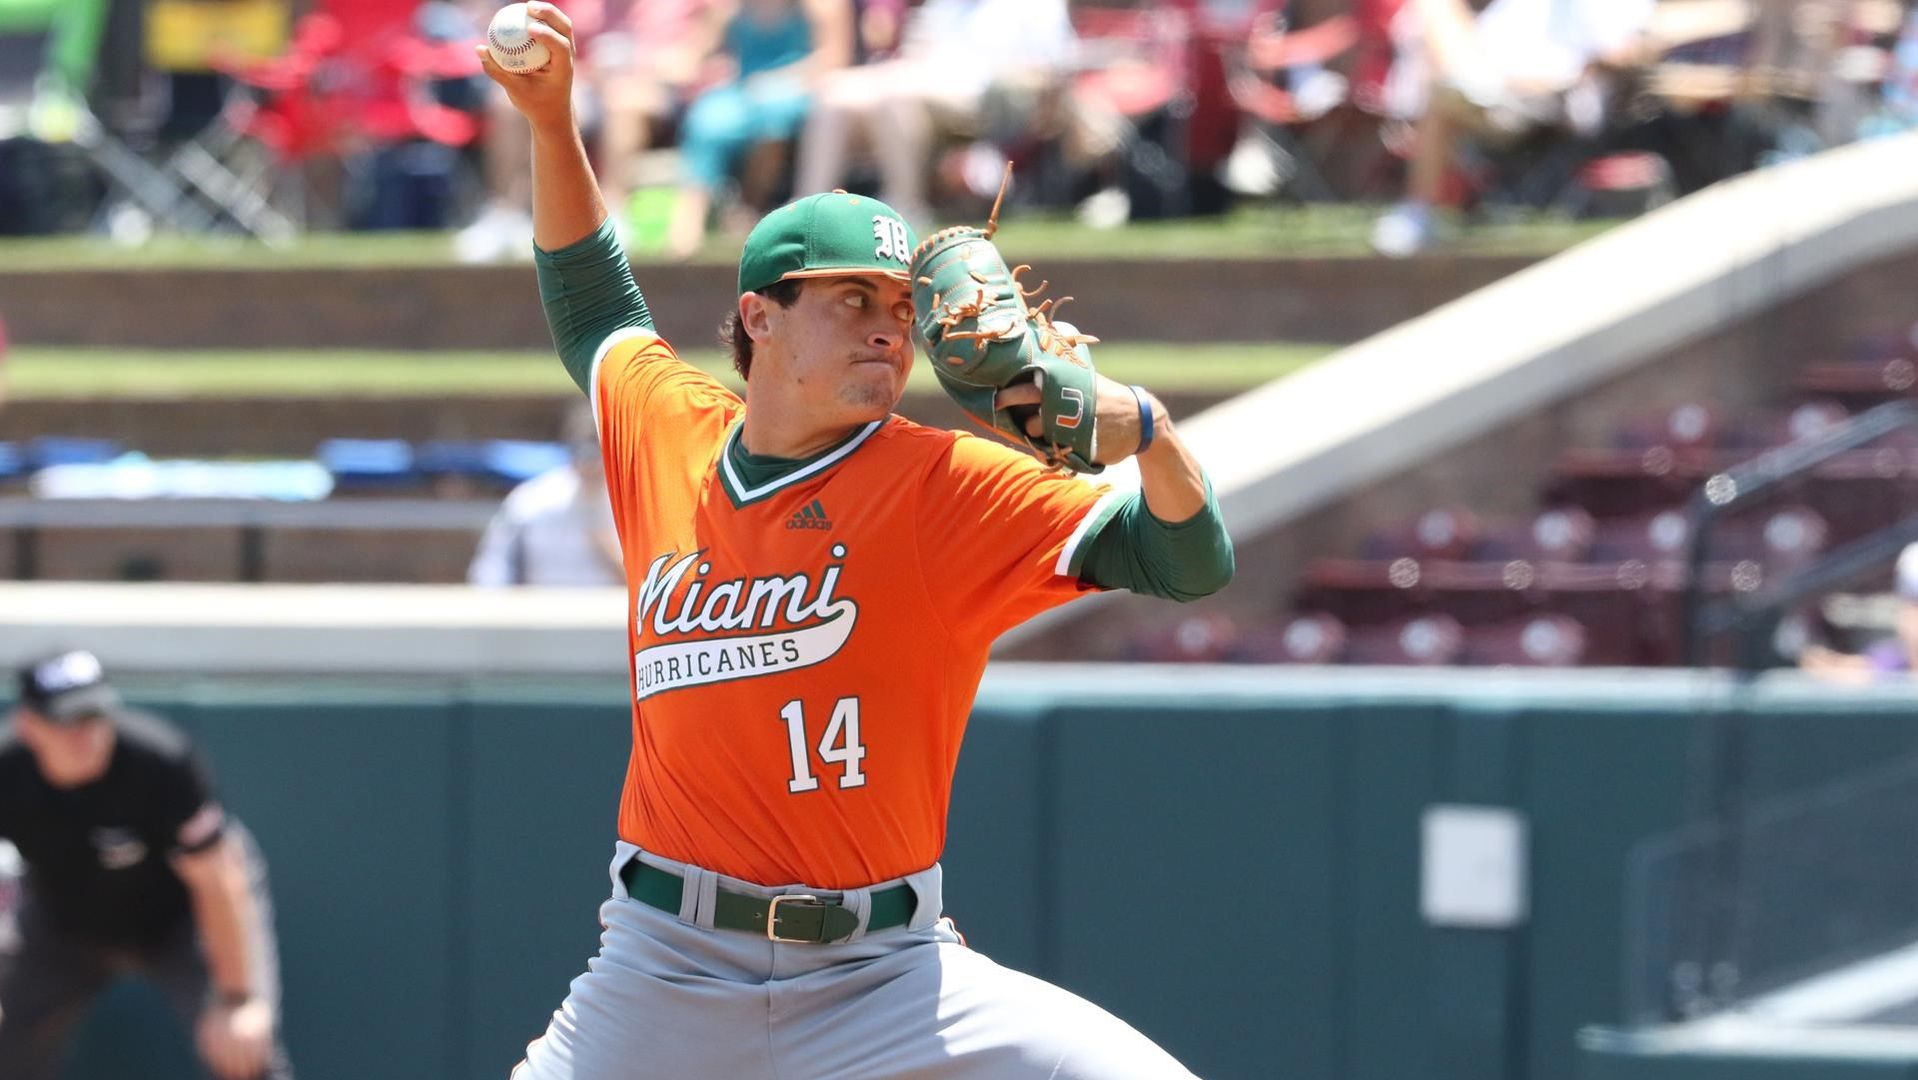 Canes Stay Alive in Starkville with 12-2 Win